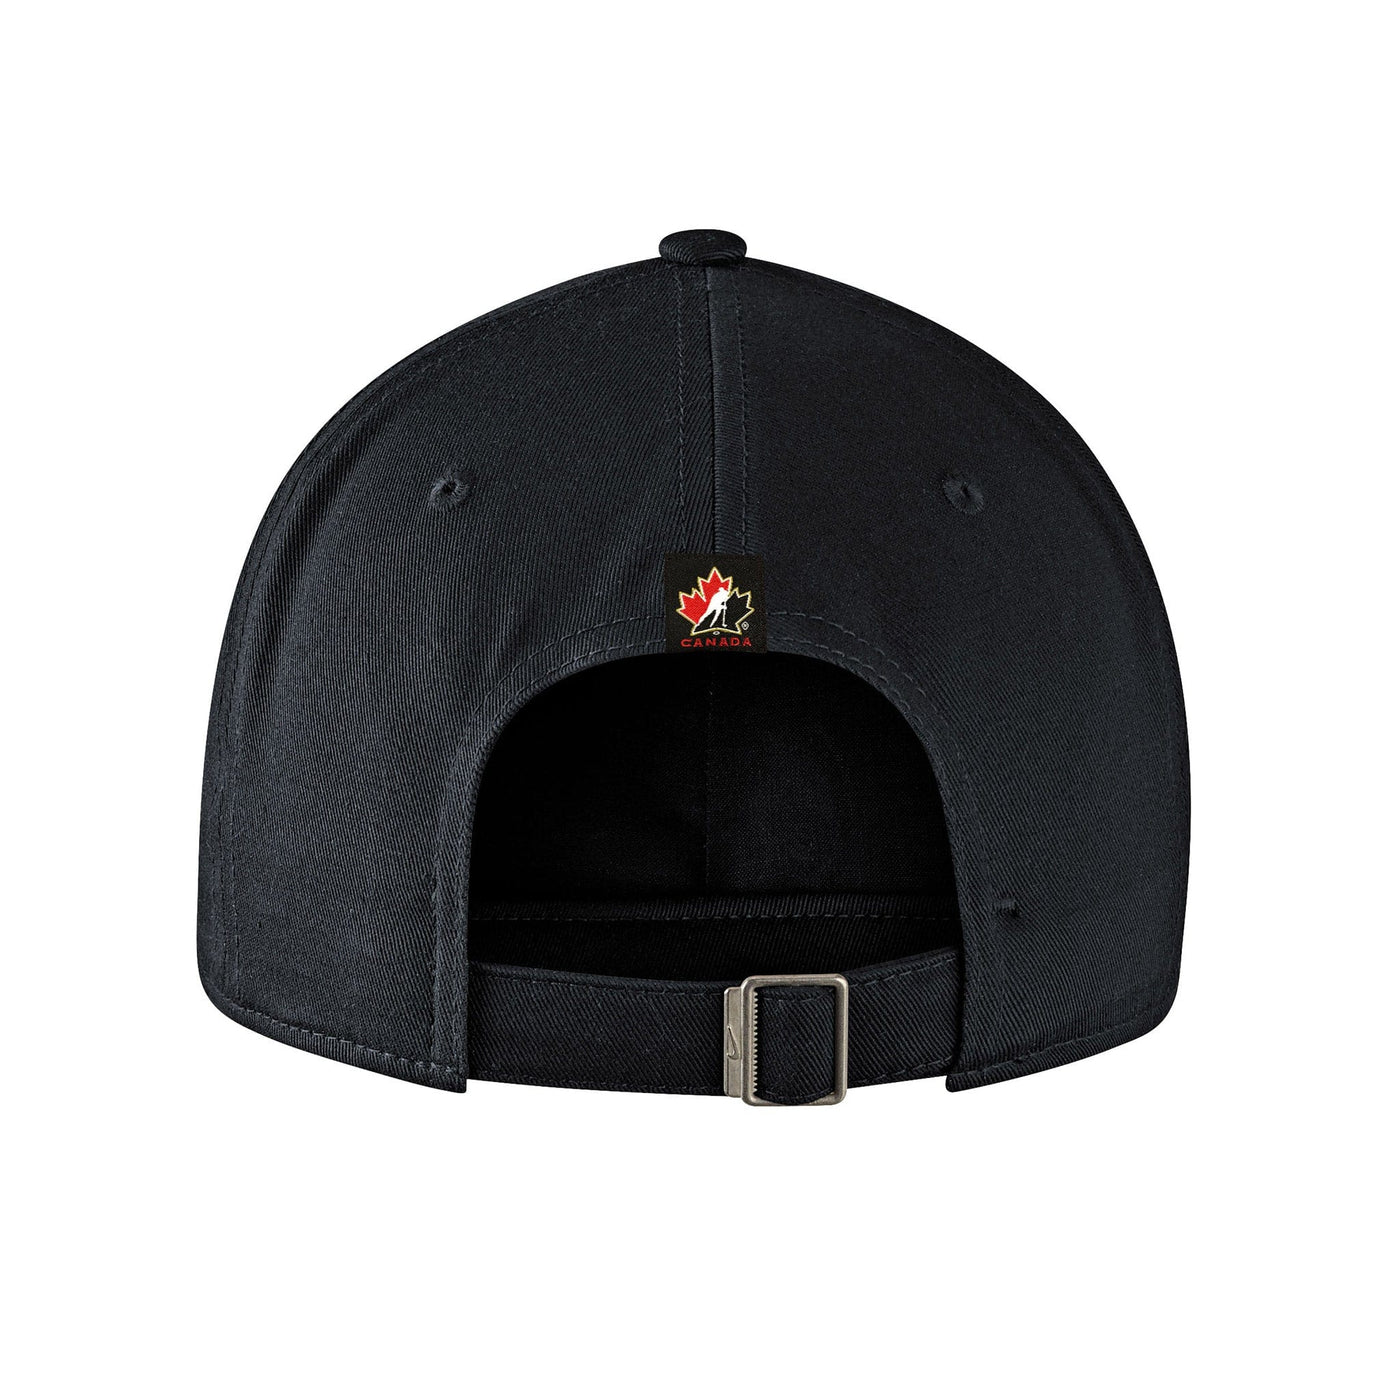 Team Canada Nike Adjustable Youth Hat